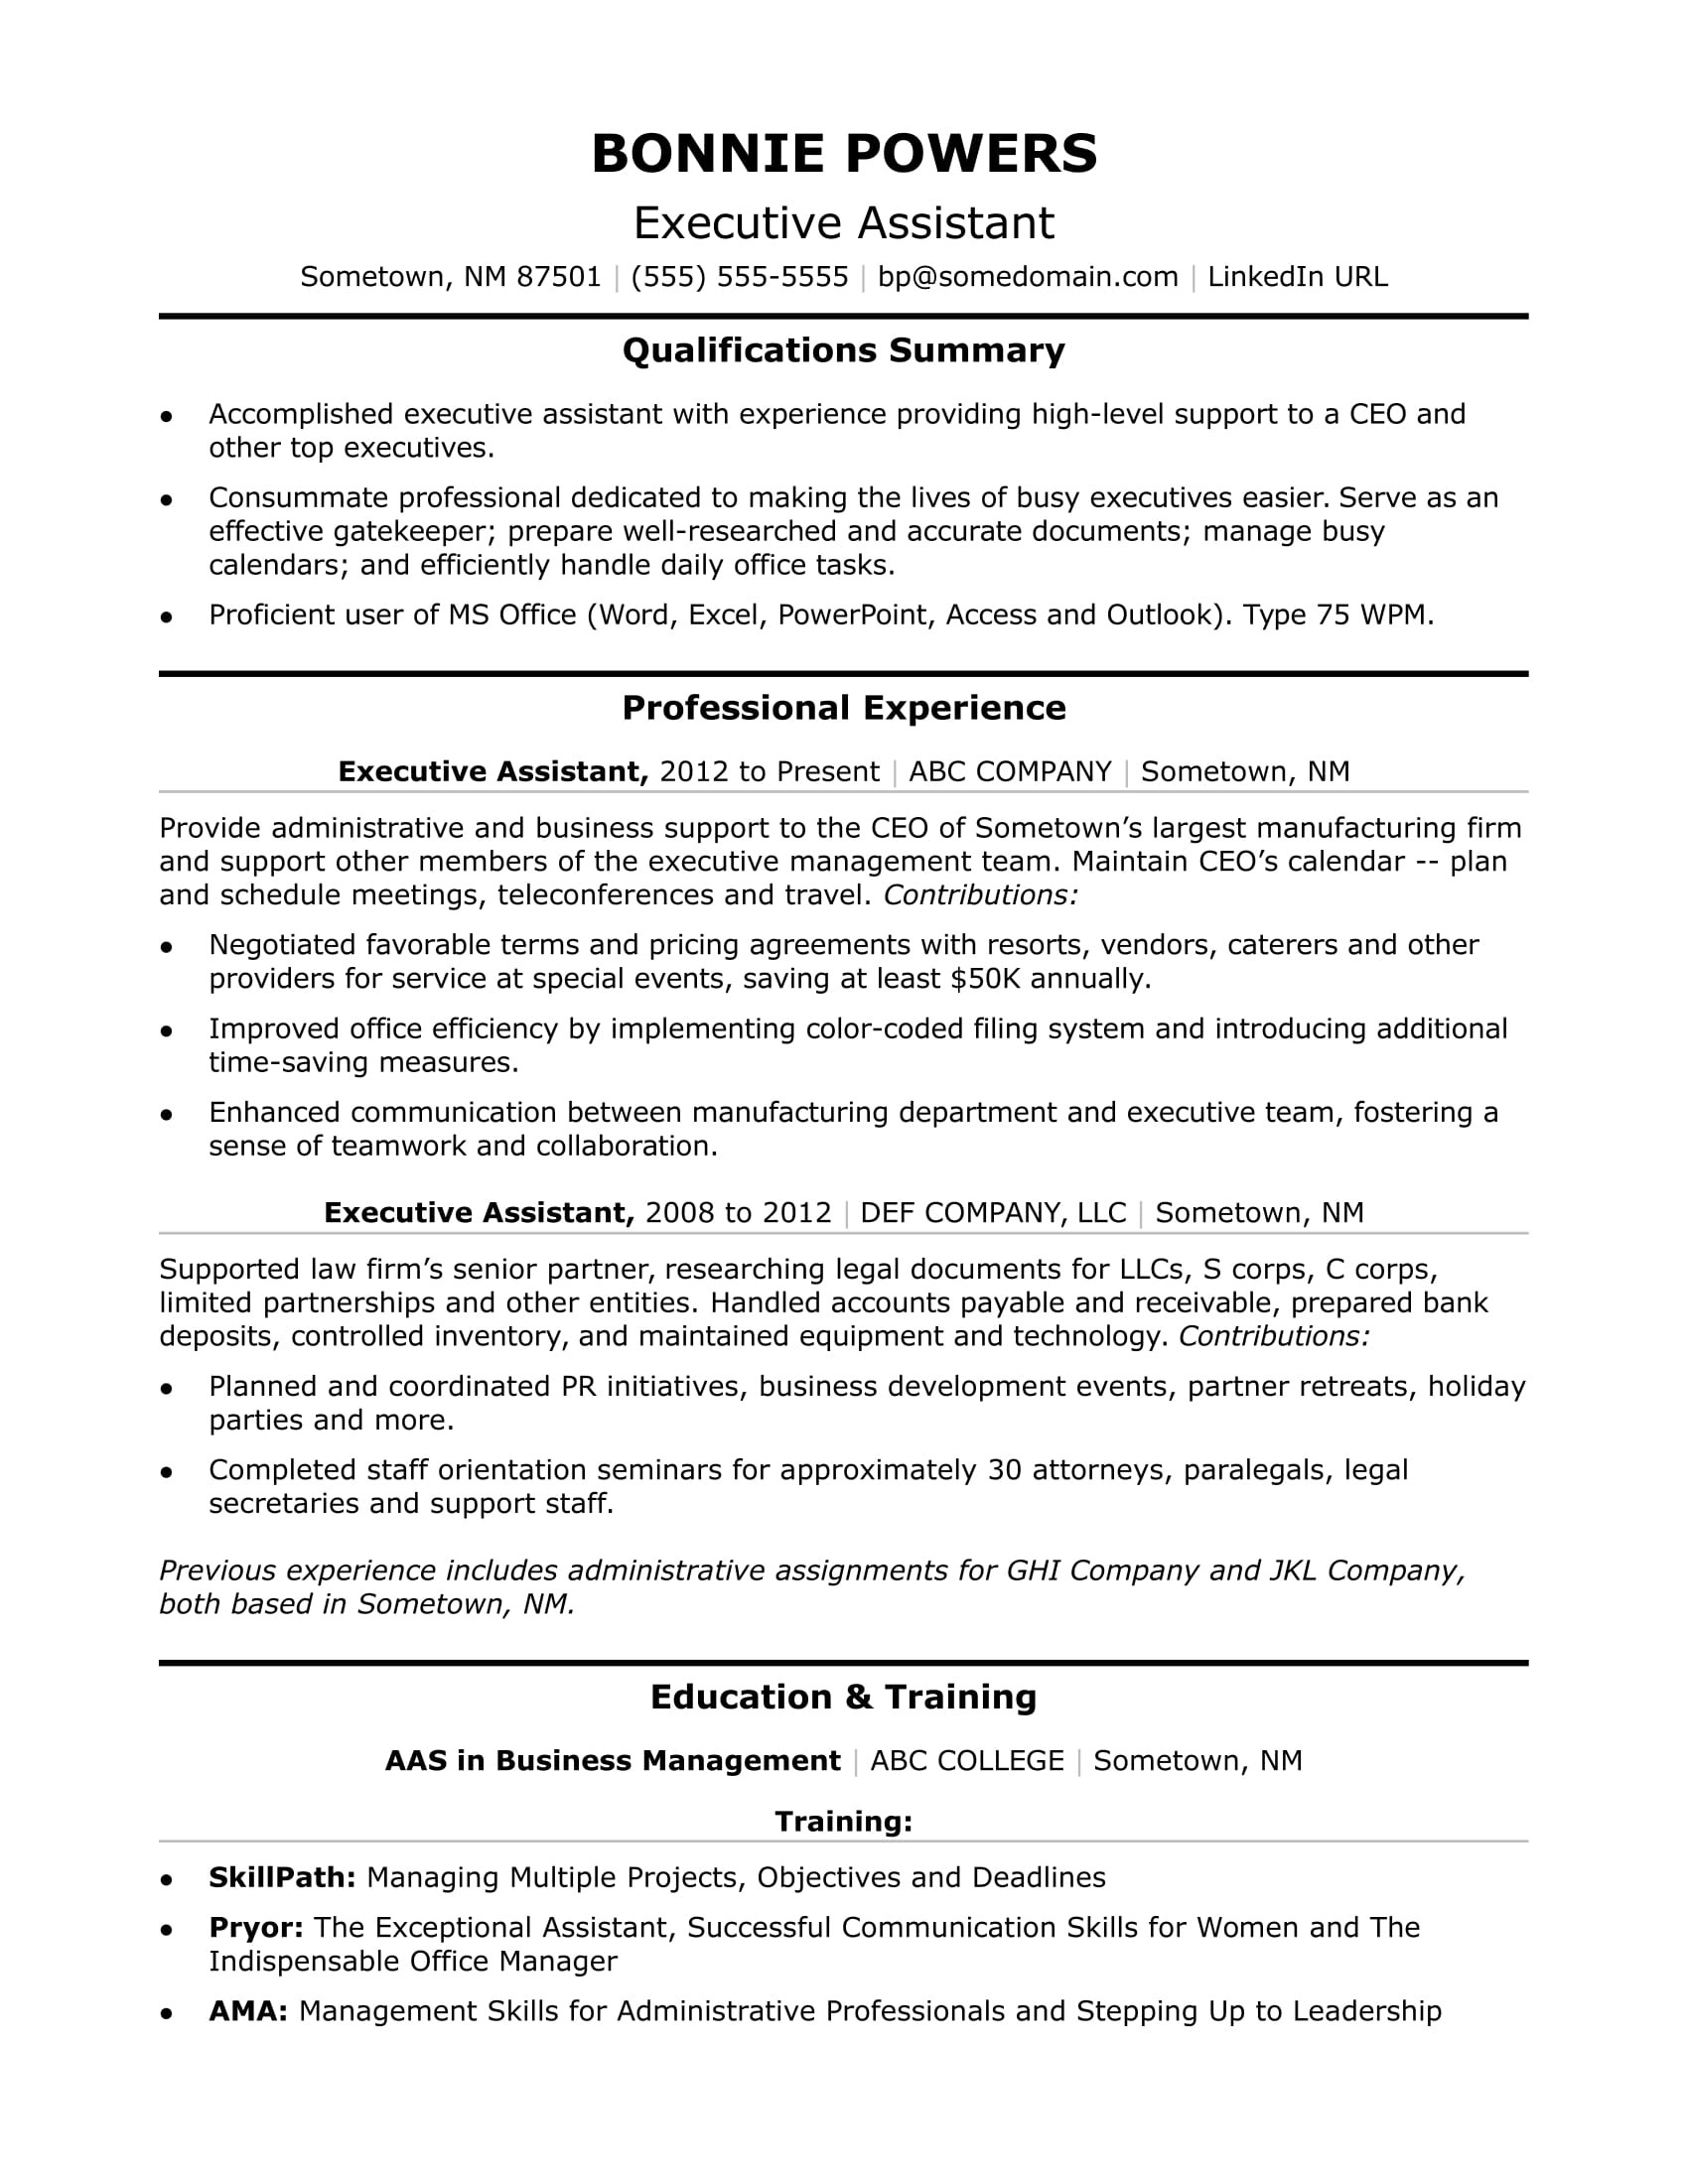 Sample Resume for Executive assistant Office Manager Executive Administrative assistant Resume Sample